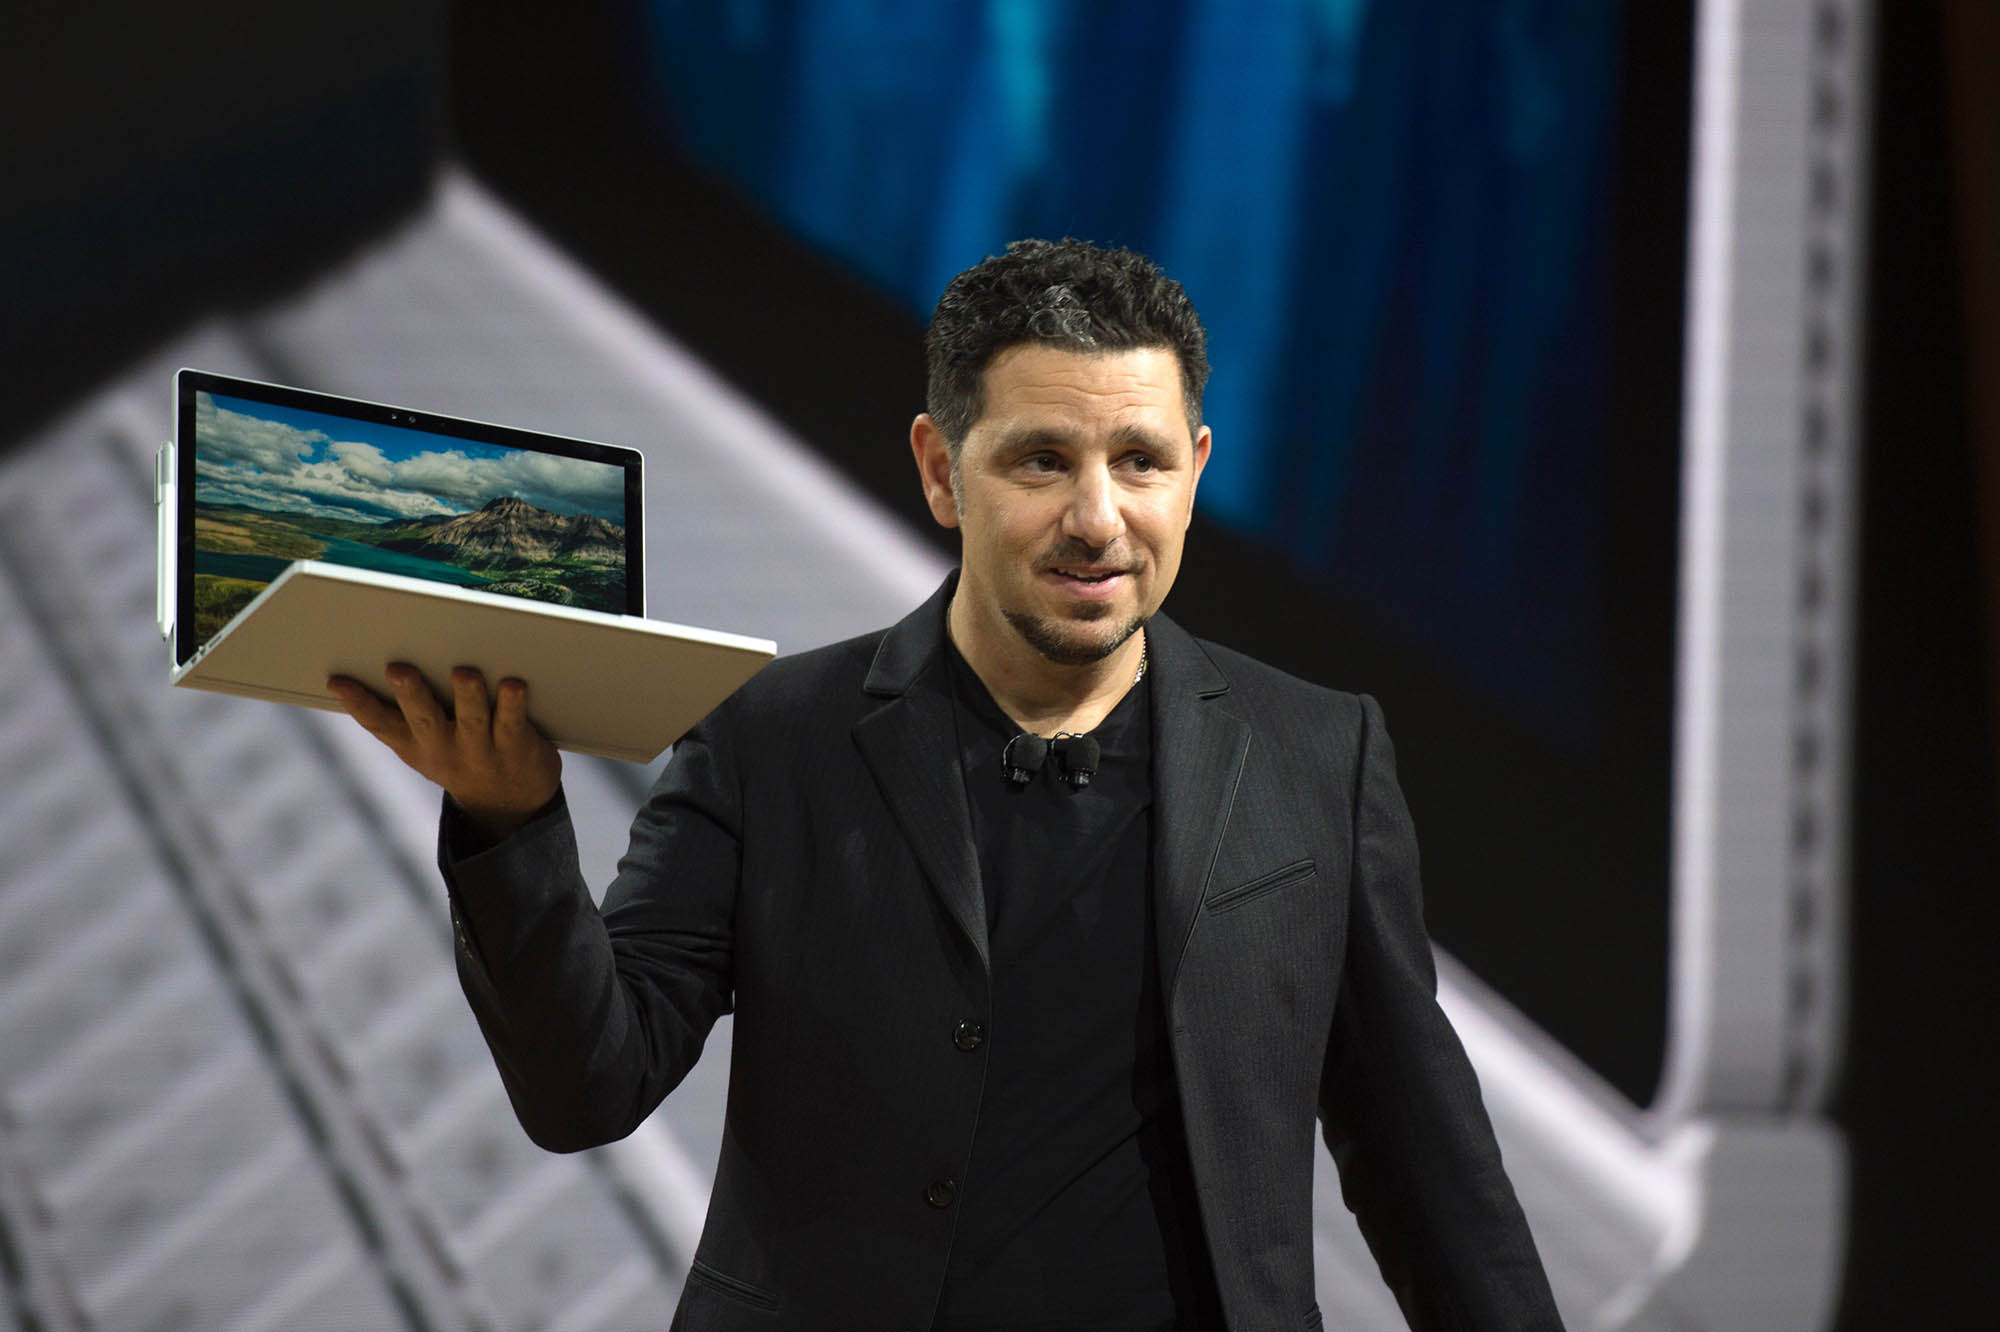 Microsoft’s executive shakeup casts a shadow on upcoming Surface event